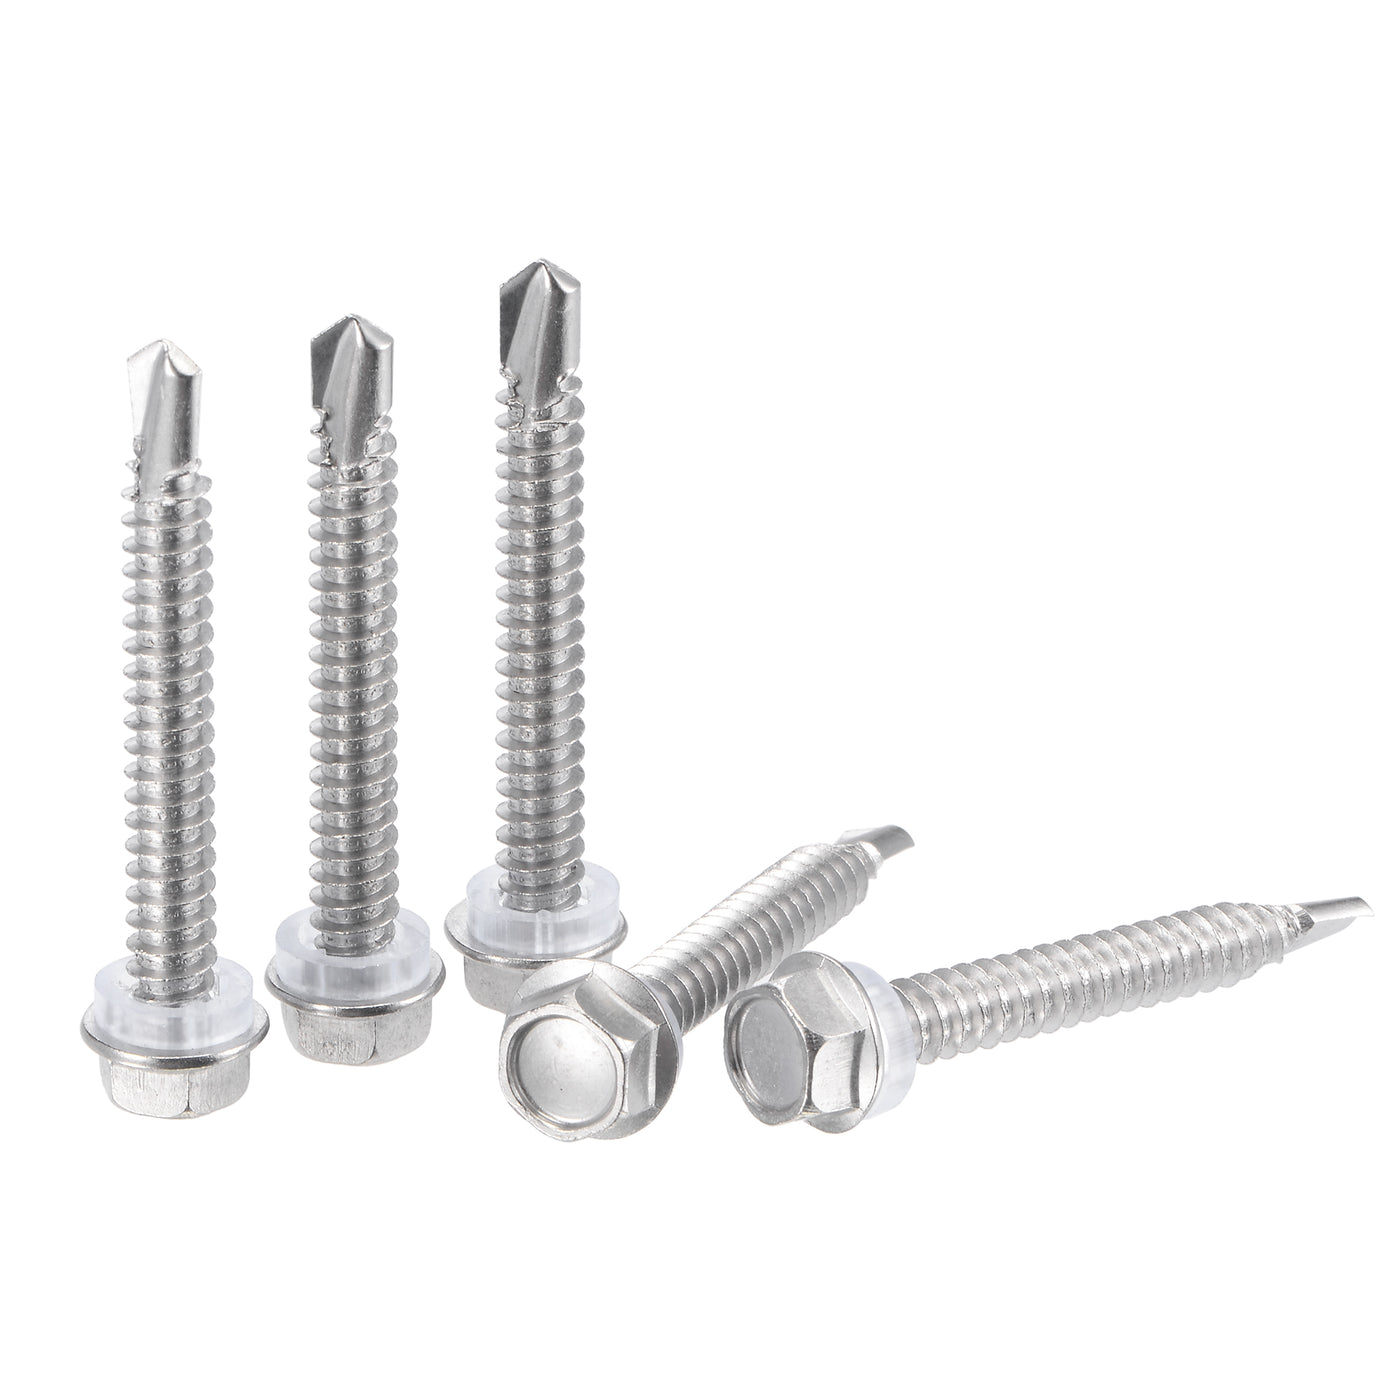 uxcell Uxcell #14 x 1 31/32" 410 Stainless Steel Hex Washer Head Self Drilling Screws 50pcs